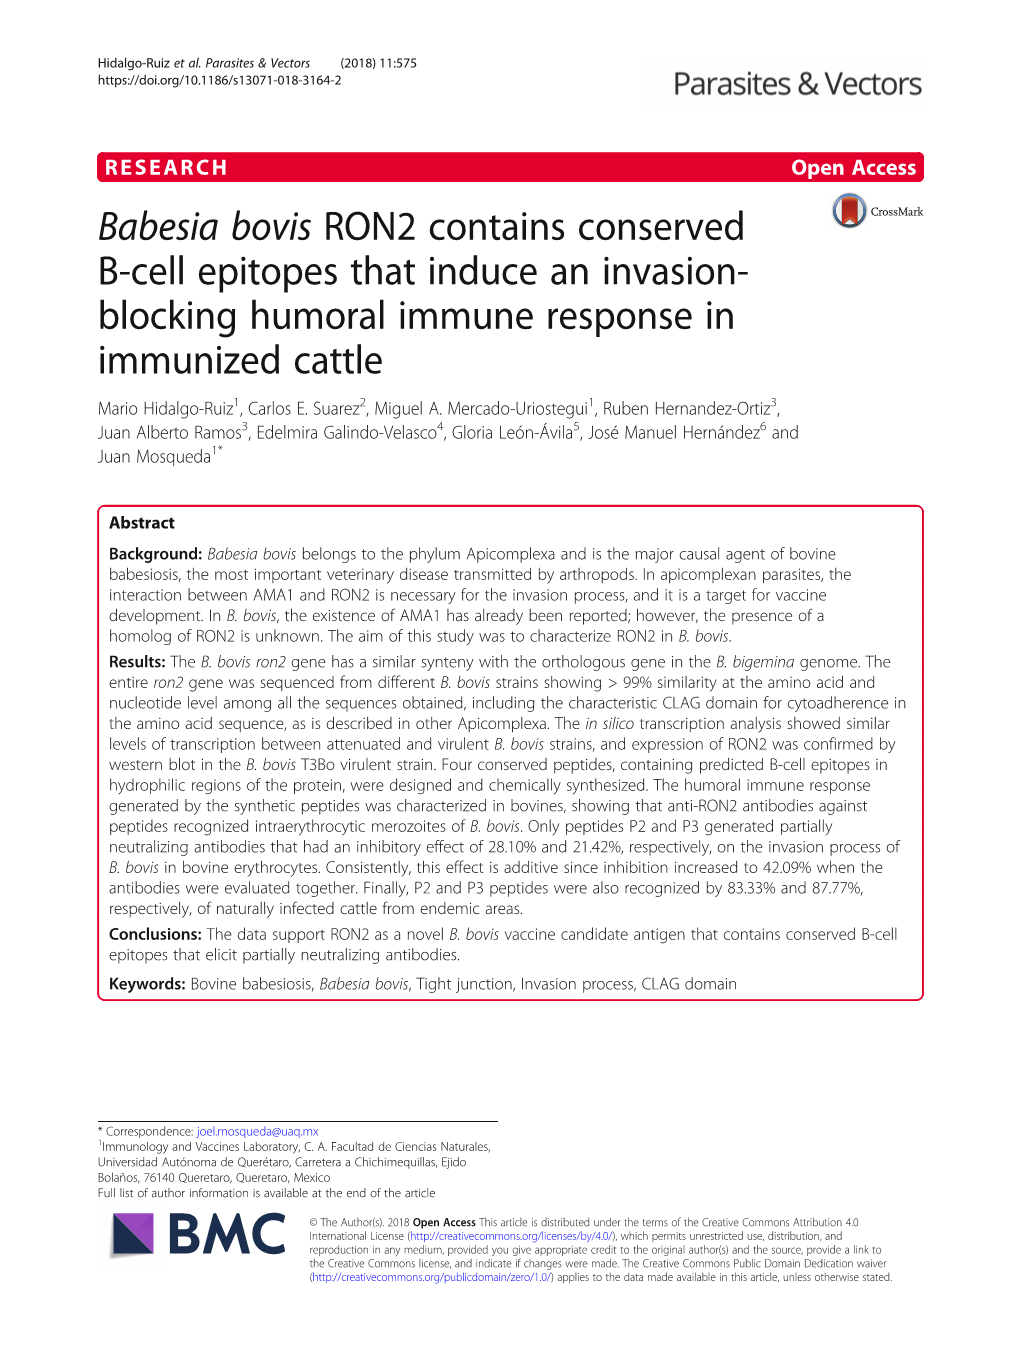 Babesia Bovis RON2 Contains Conserved B-Cell Epitopes That Induce an Invasion- Blocking Humoral Immune Response in Immunized Cattle Mario Hidalgo-Ruiz1, Carlos E